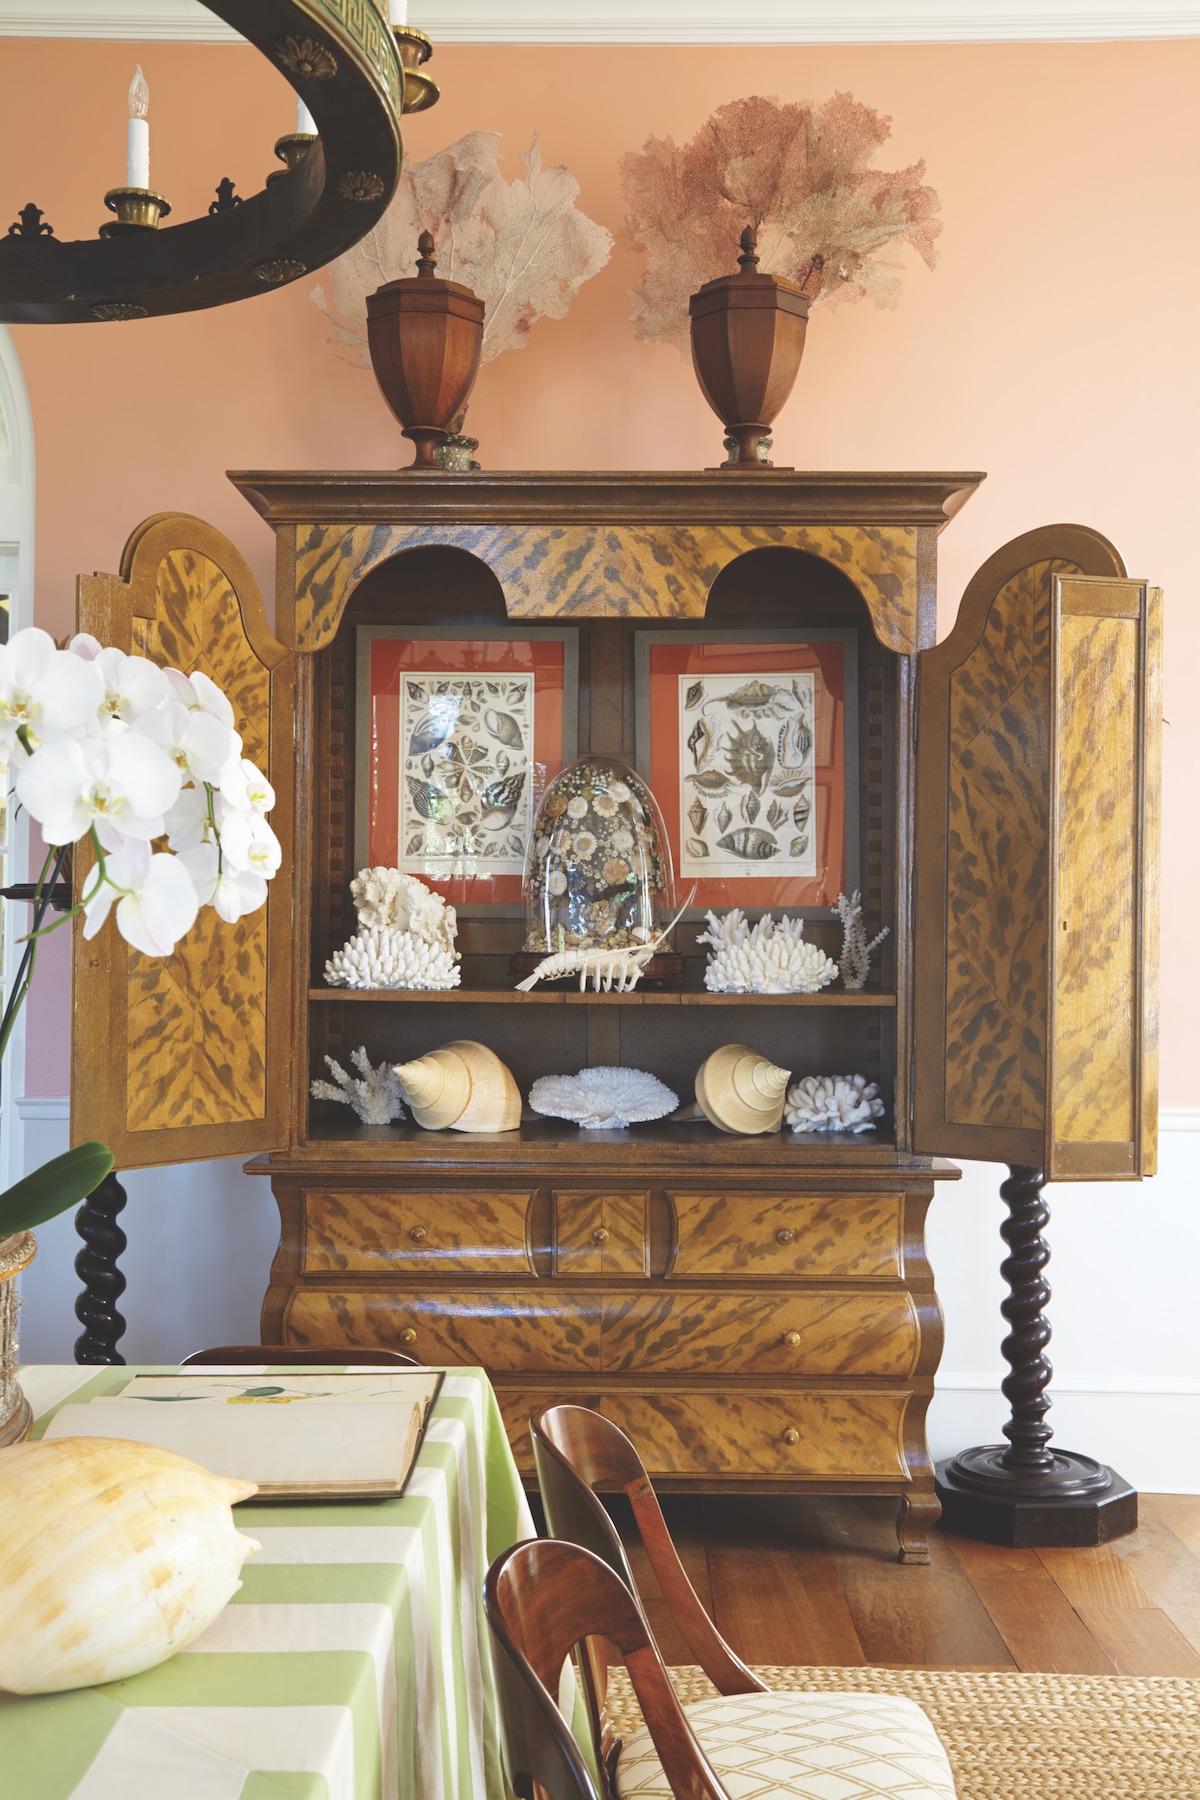 A faux-tortoiseshell French armoire houses prints, shells, and other curiosities.